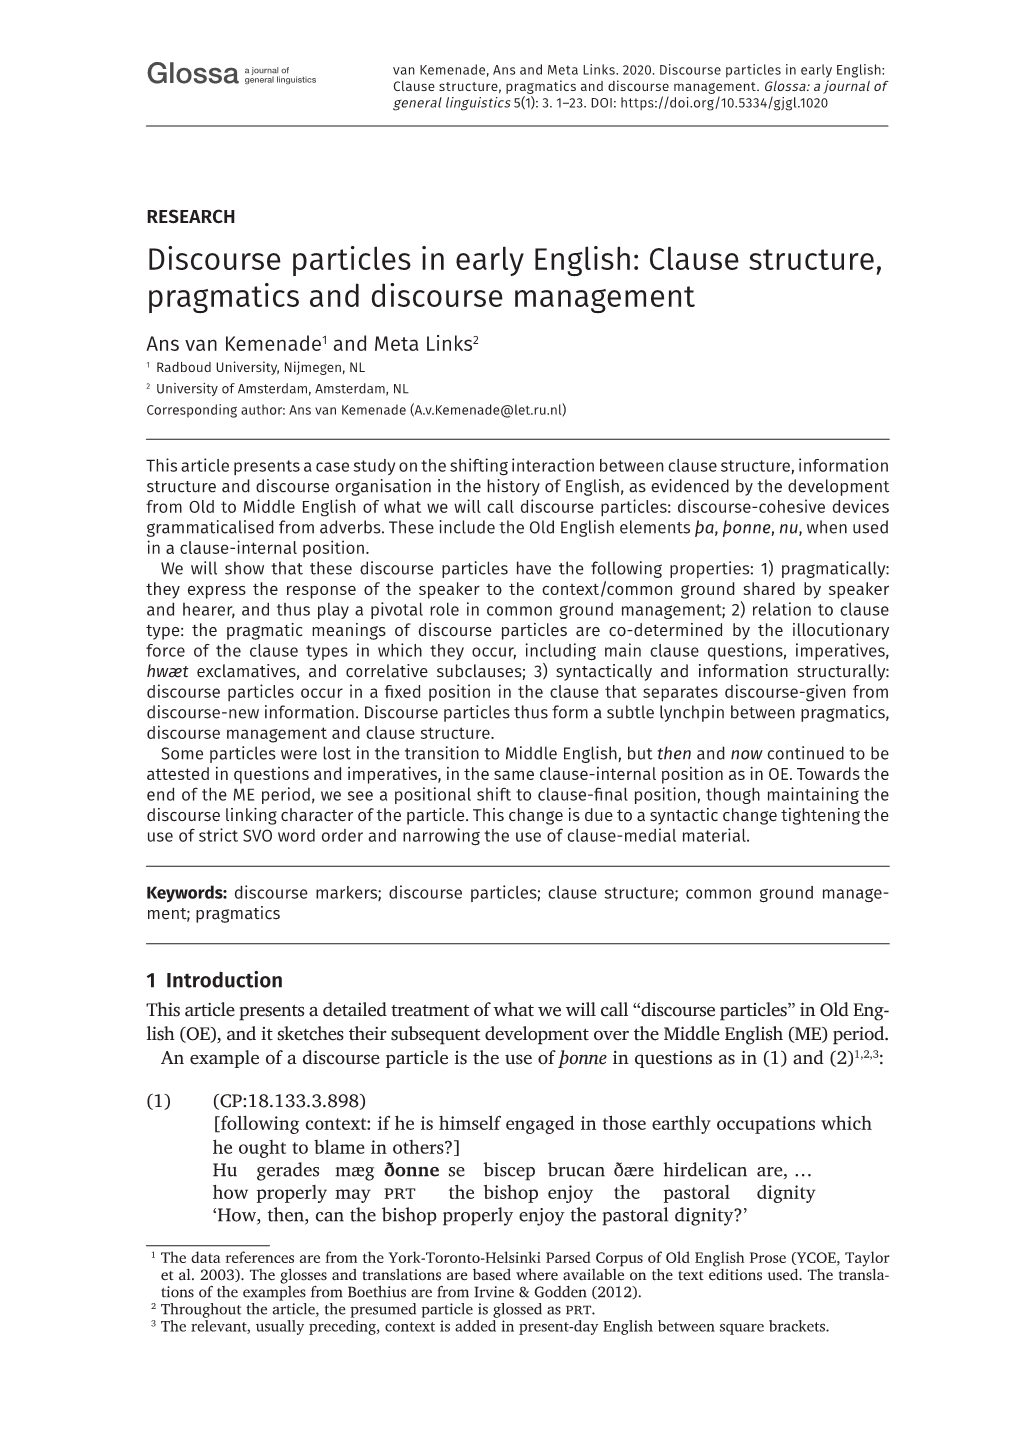 Clause Structure, Pragmatics and Discourse Management